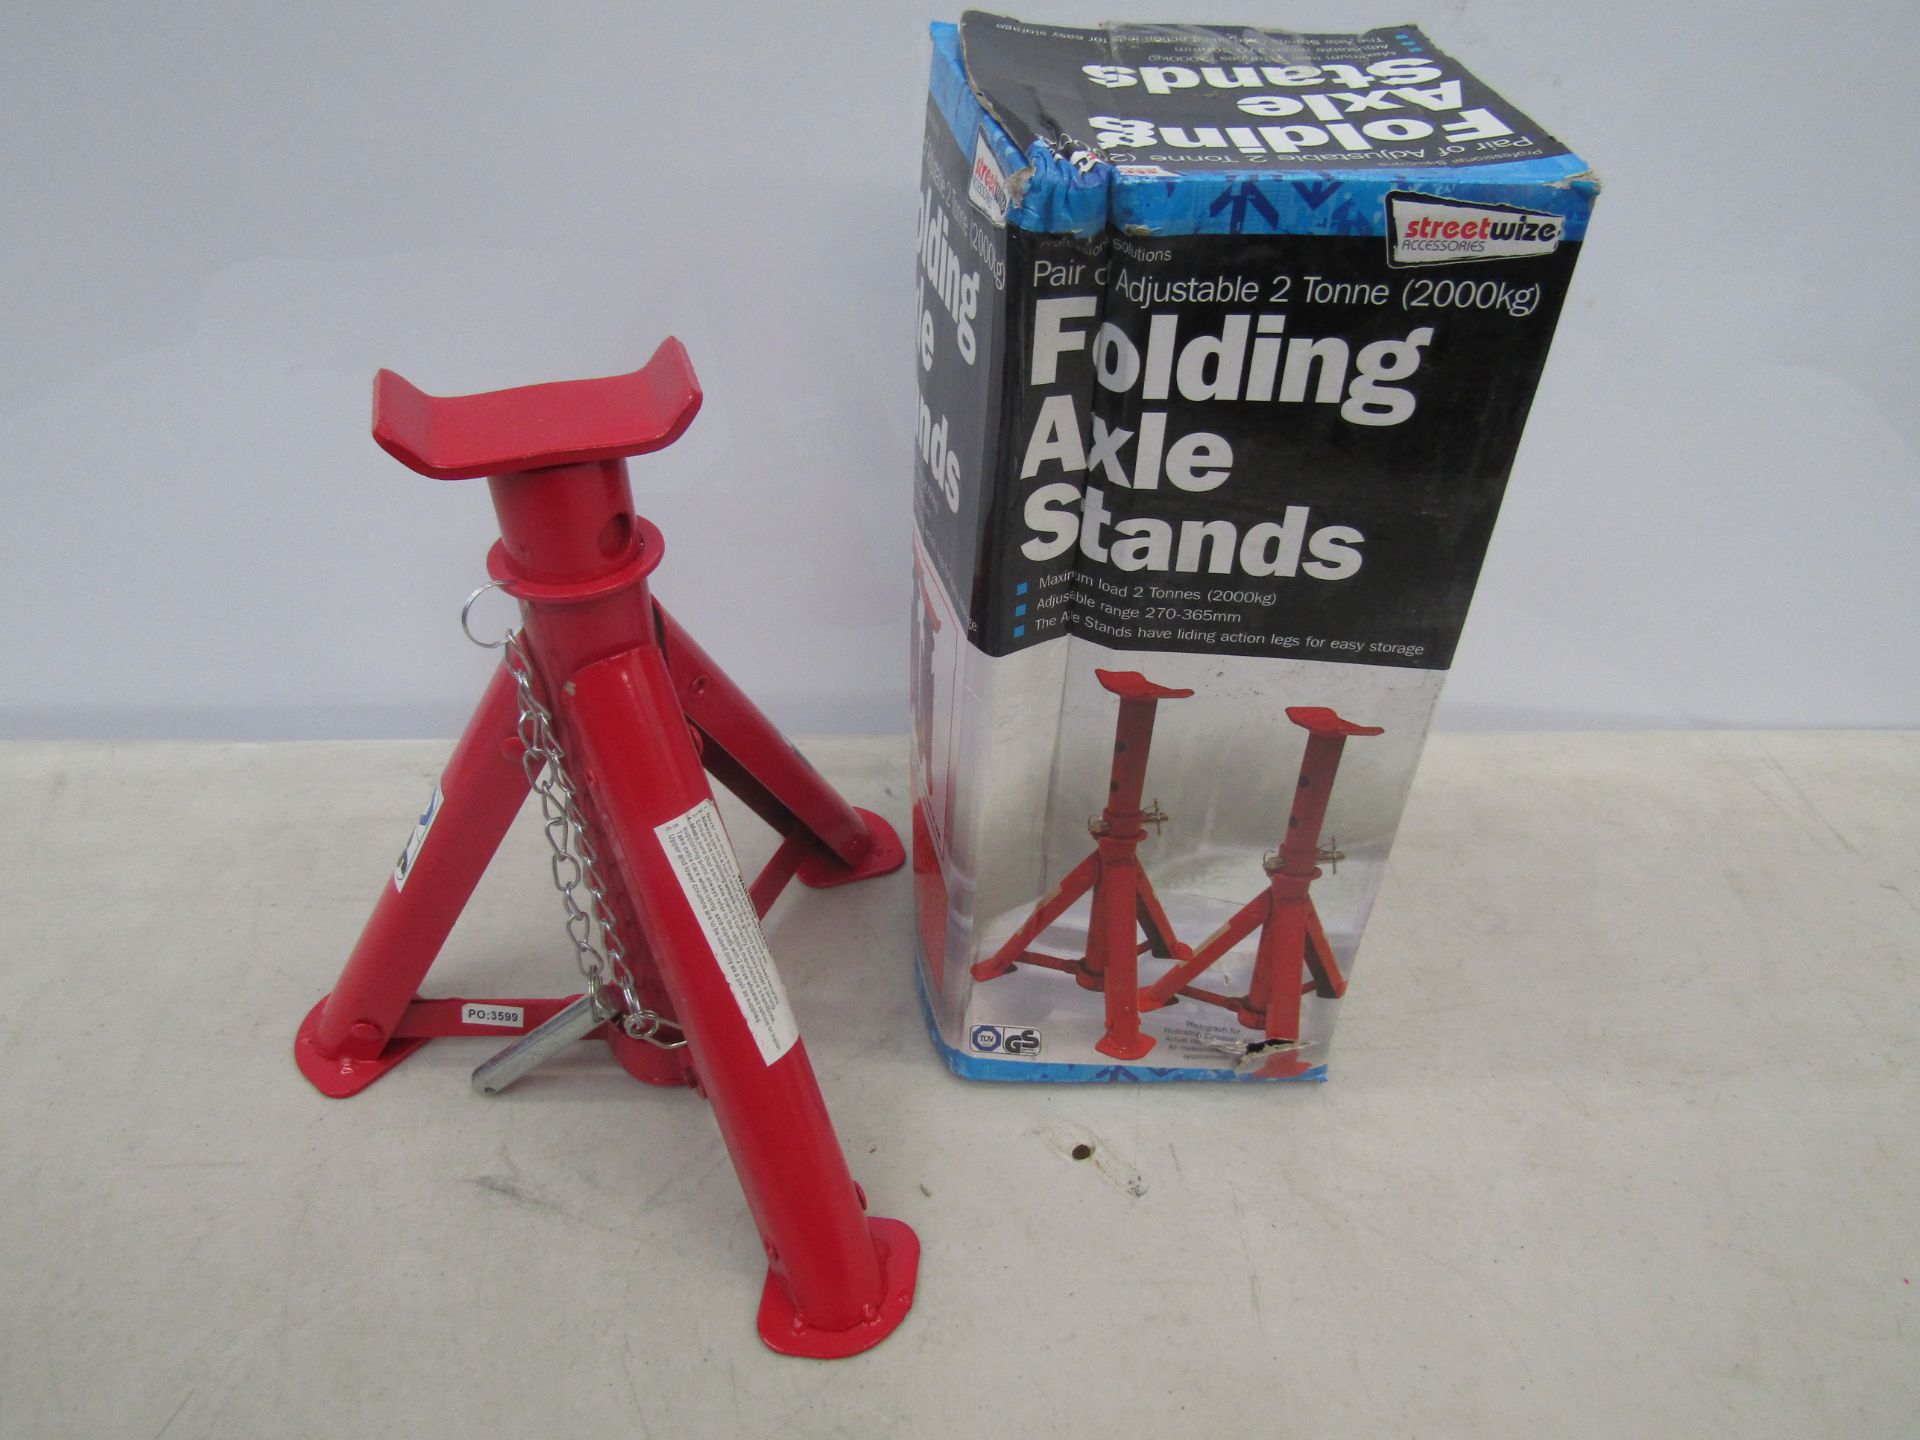 Pair of 2 tonne folding axle stands, unused and boxed.